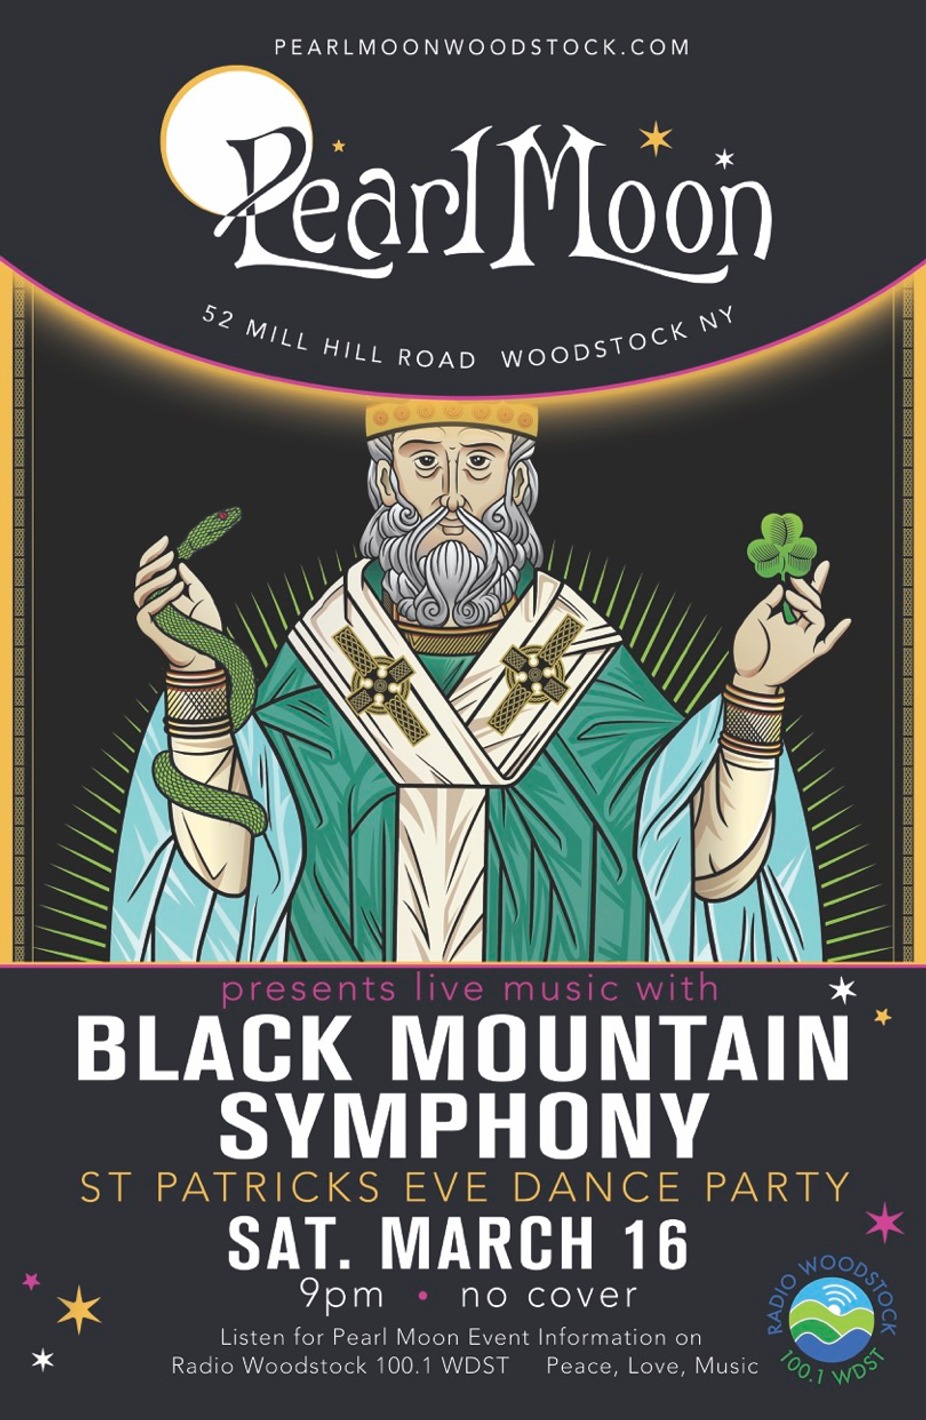 ST. PATRICK'S EVE with BLACK MOUNTAIN SYMPHONY at PEARL MOON WOODSTOCK event photo